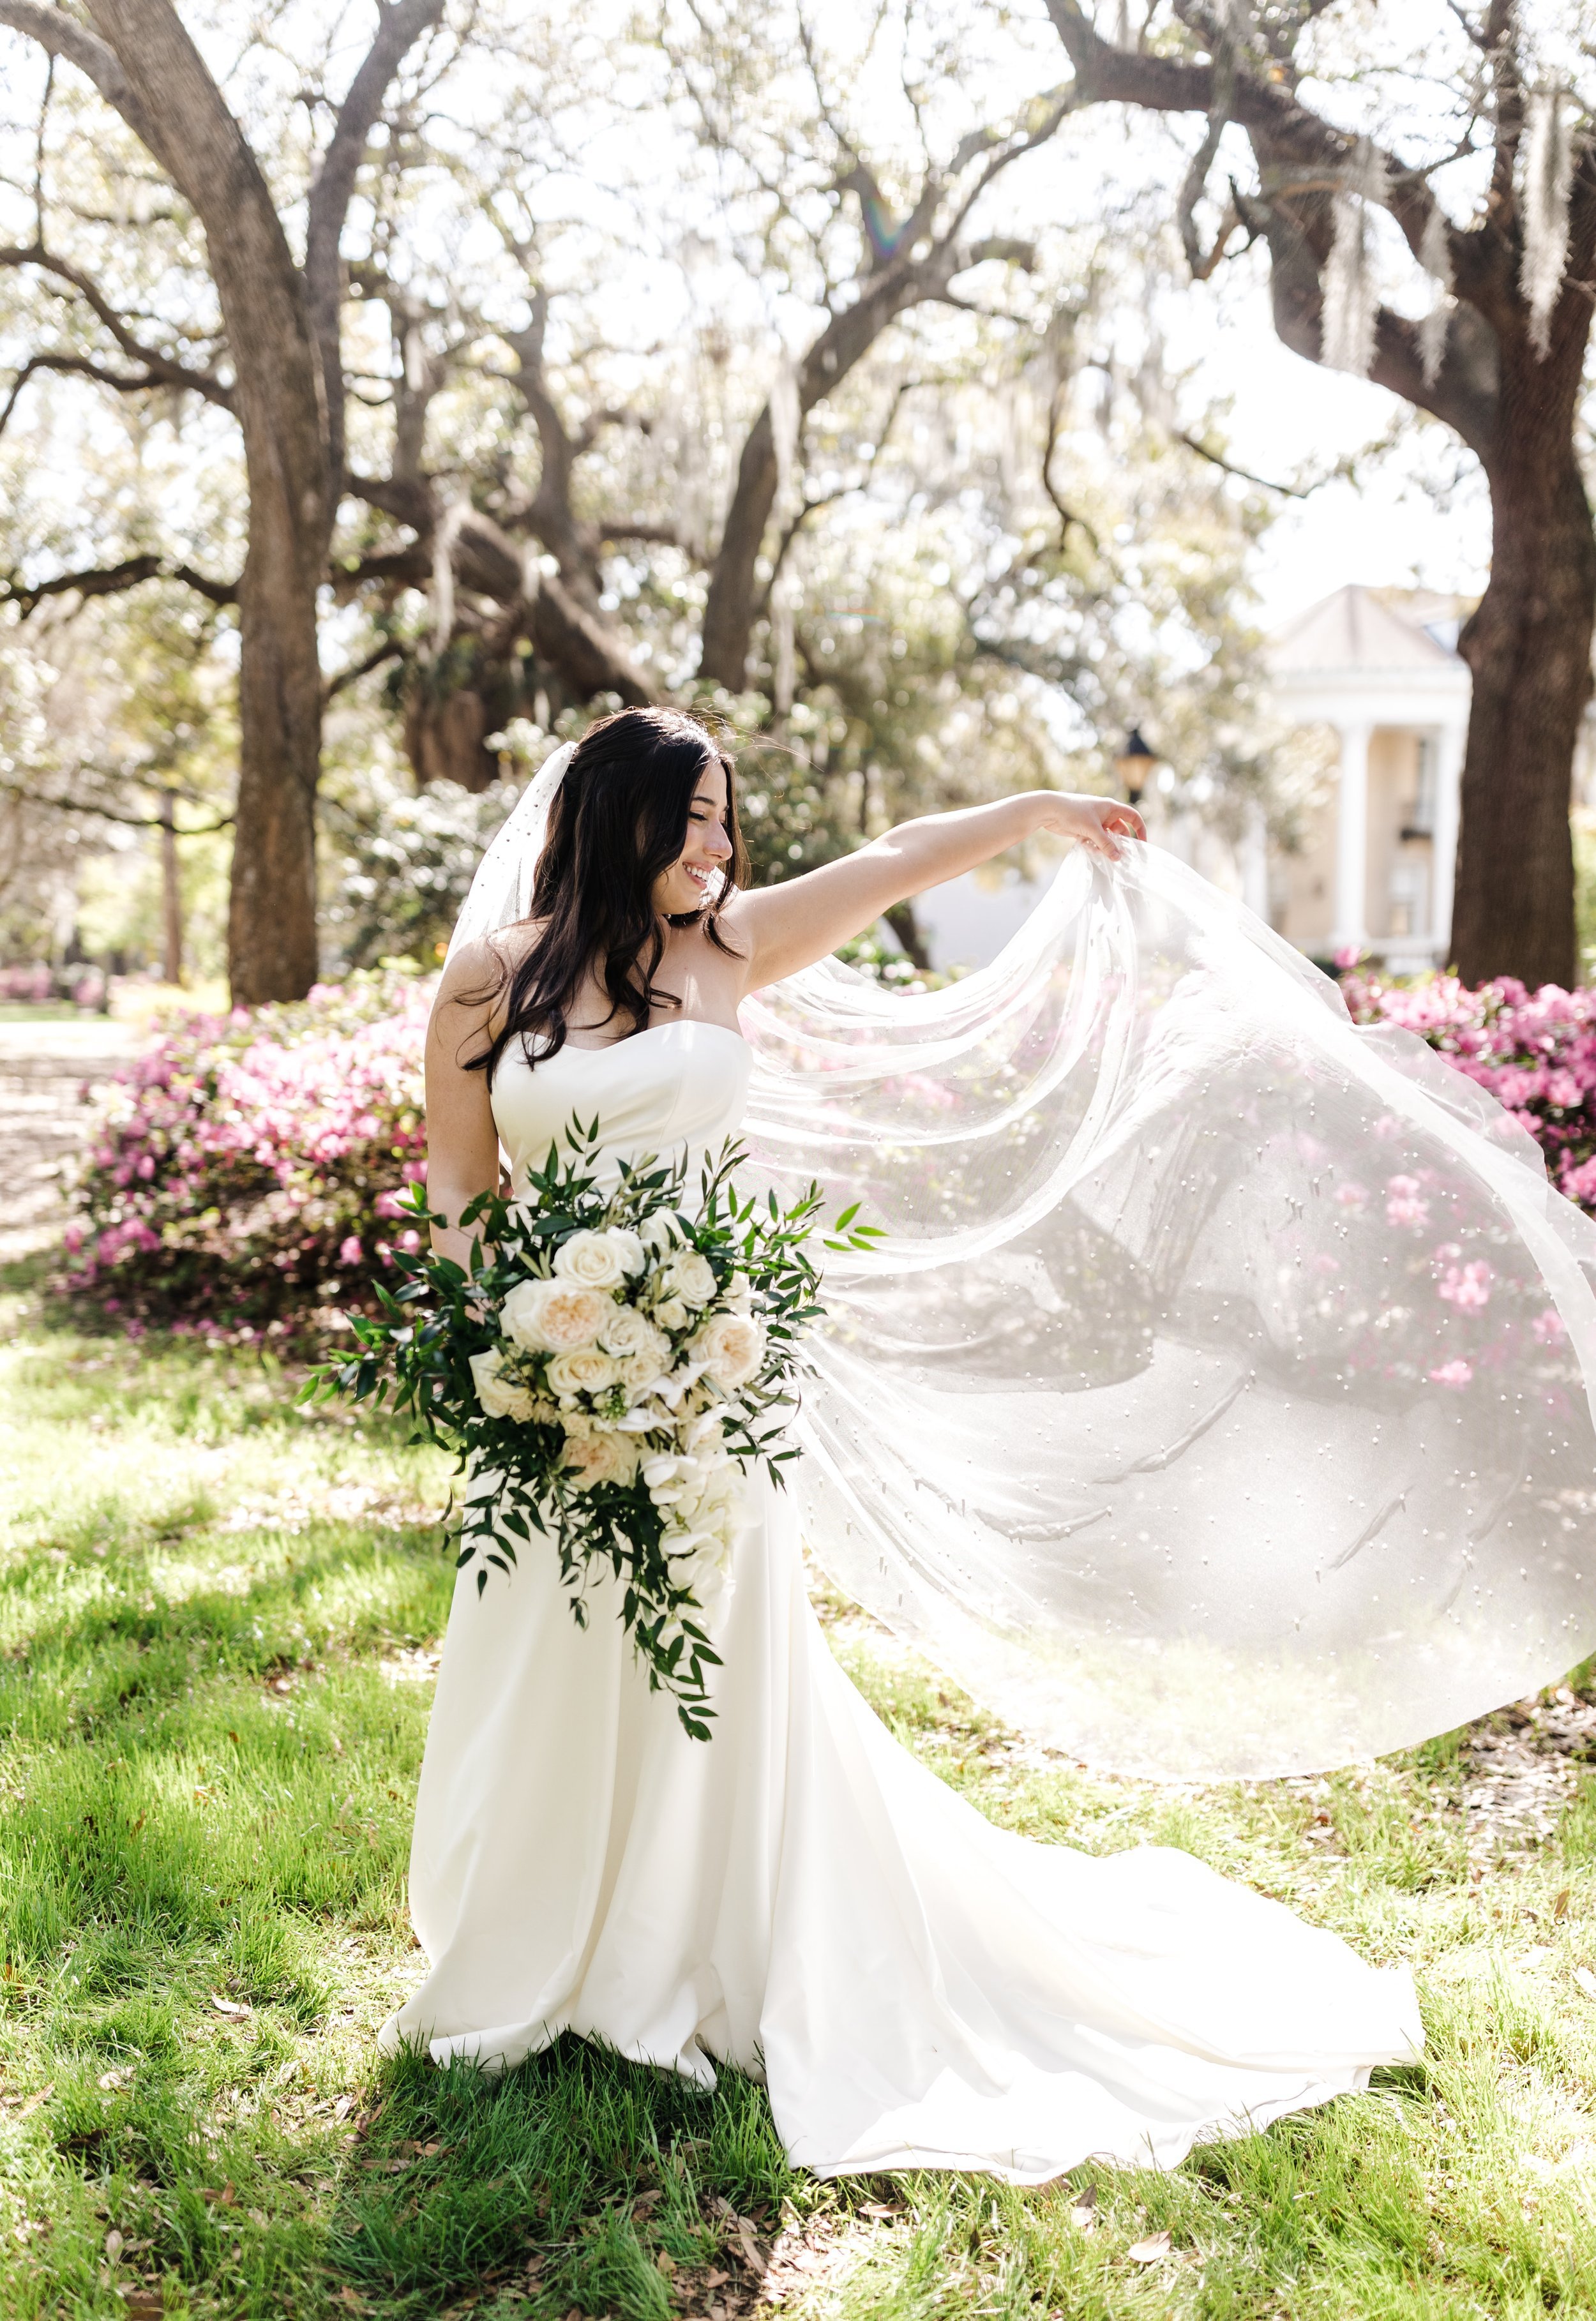 ivory-and-beau-wedding-and-florals-annelise-and-preston-wedding-blog-savannah-wedding-savannah-wedding-coordinator-savannah-florsit-wedding-florist-southern-wedding-forsyth-park-fountain-soho-south-savannah-wedding-gmp20199345-355.jpg